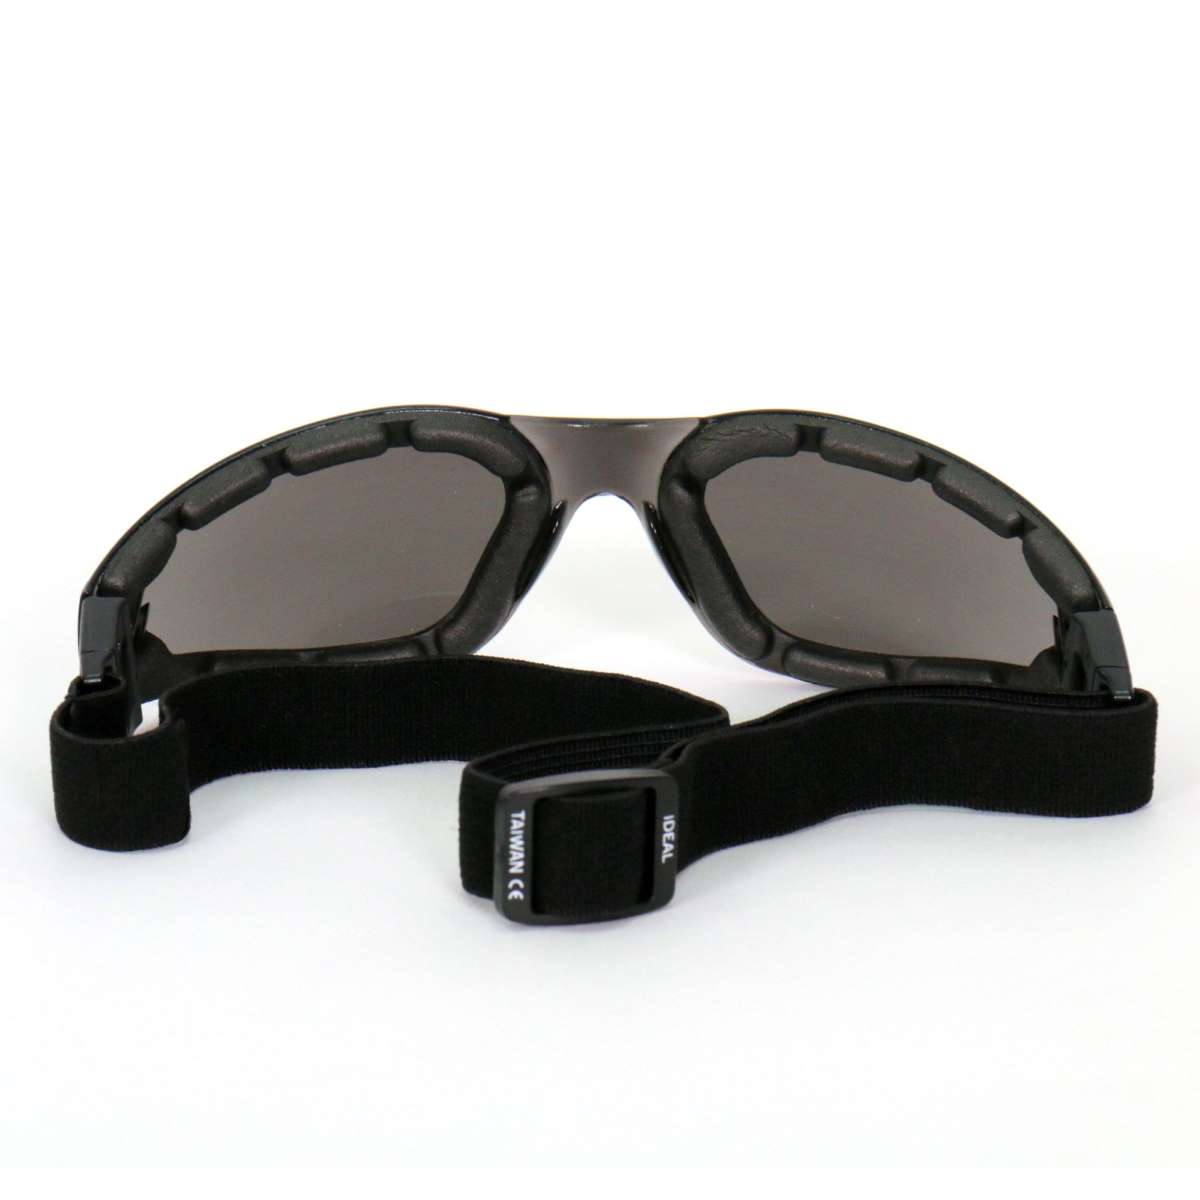 Hot Leathers Safety Sunglasses Goggles with Smoke Mirror Lenses SGG1013